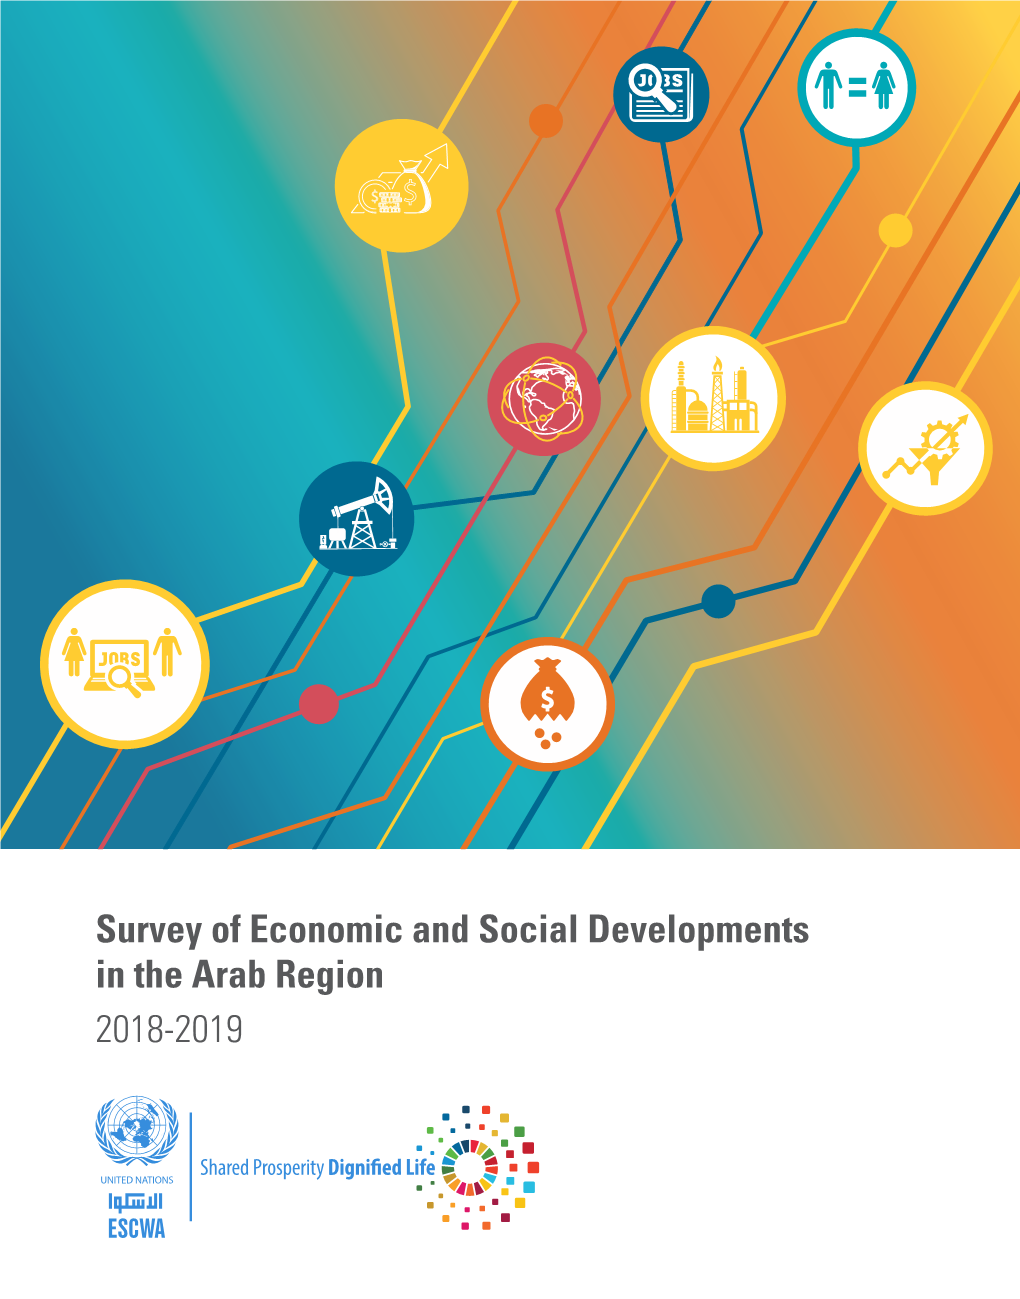 Survey of Economic and Social Developments in the Arab Region 2018-2019 VISION ESCWA, an Innovative Catalyst for a Stable, Just and Flourishing Arab Region